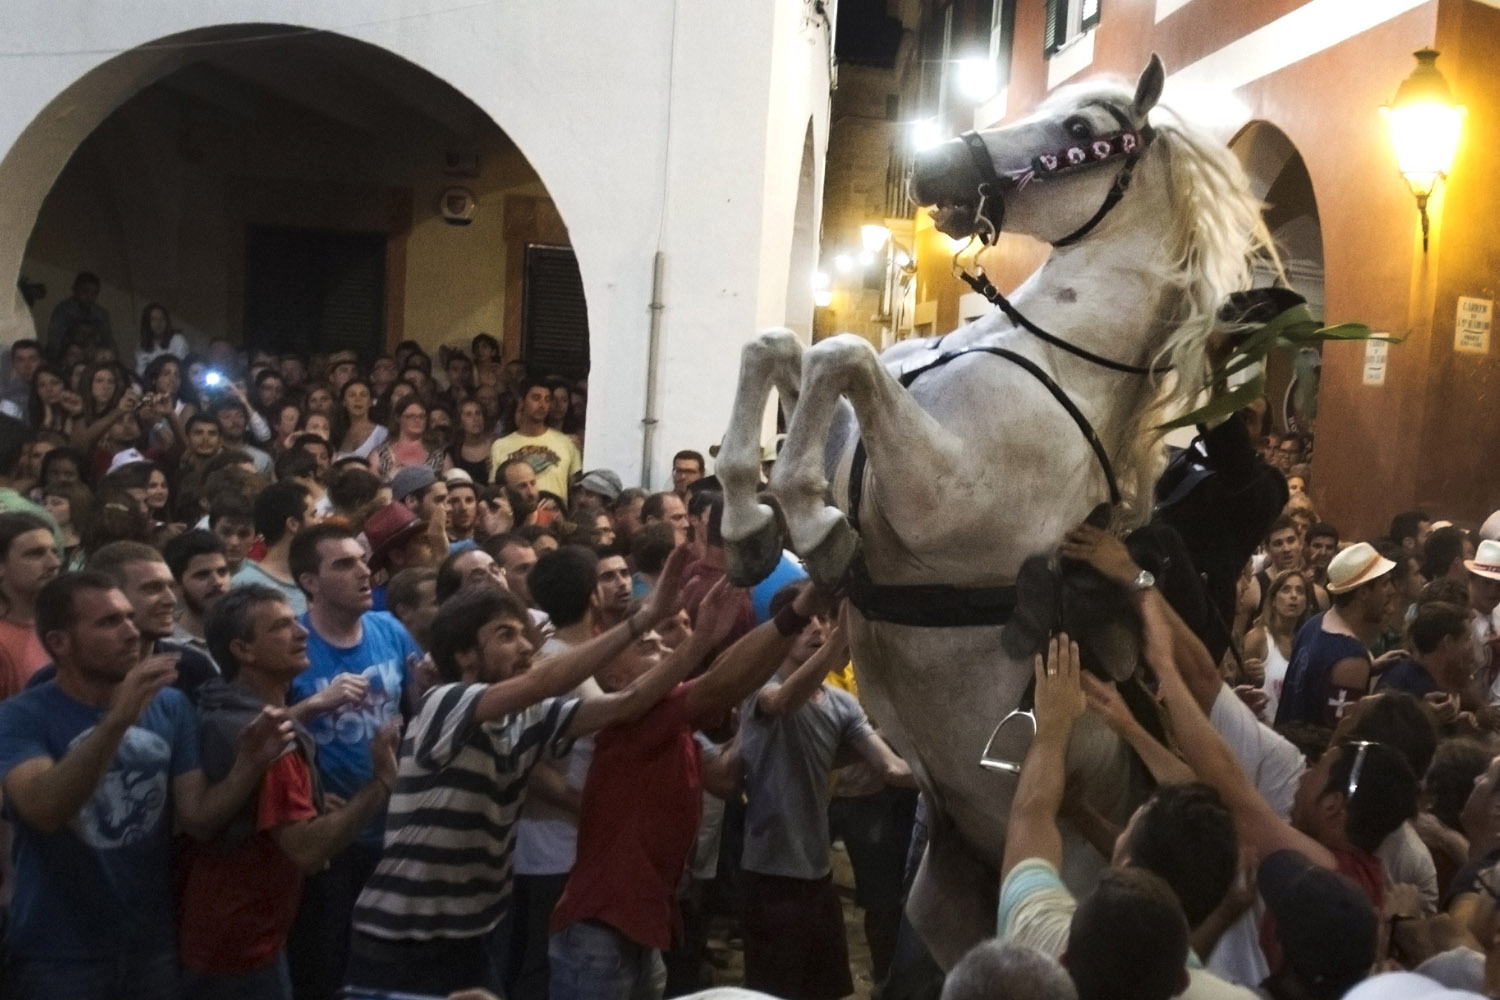 June 23, 2013. A horse rears in a crowd during a horse parade of the traditional San Juan's (Saint John) festival in the town of Ciutadella, on the Balearic Island of Menorca, on the eve of Saint John's day.